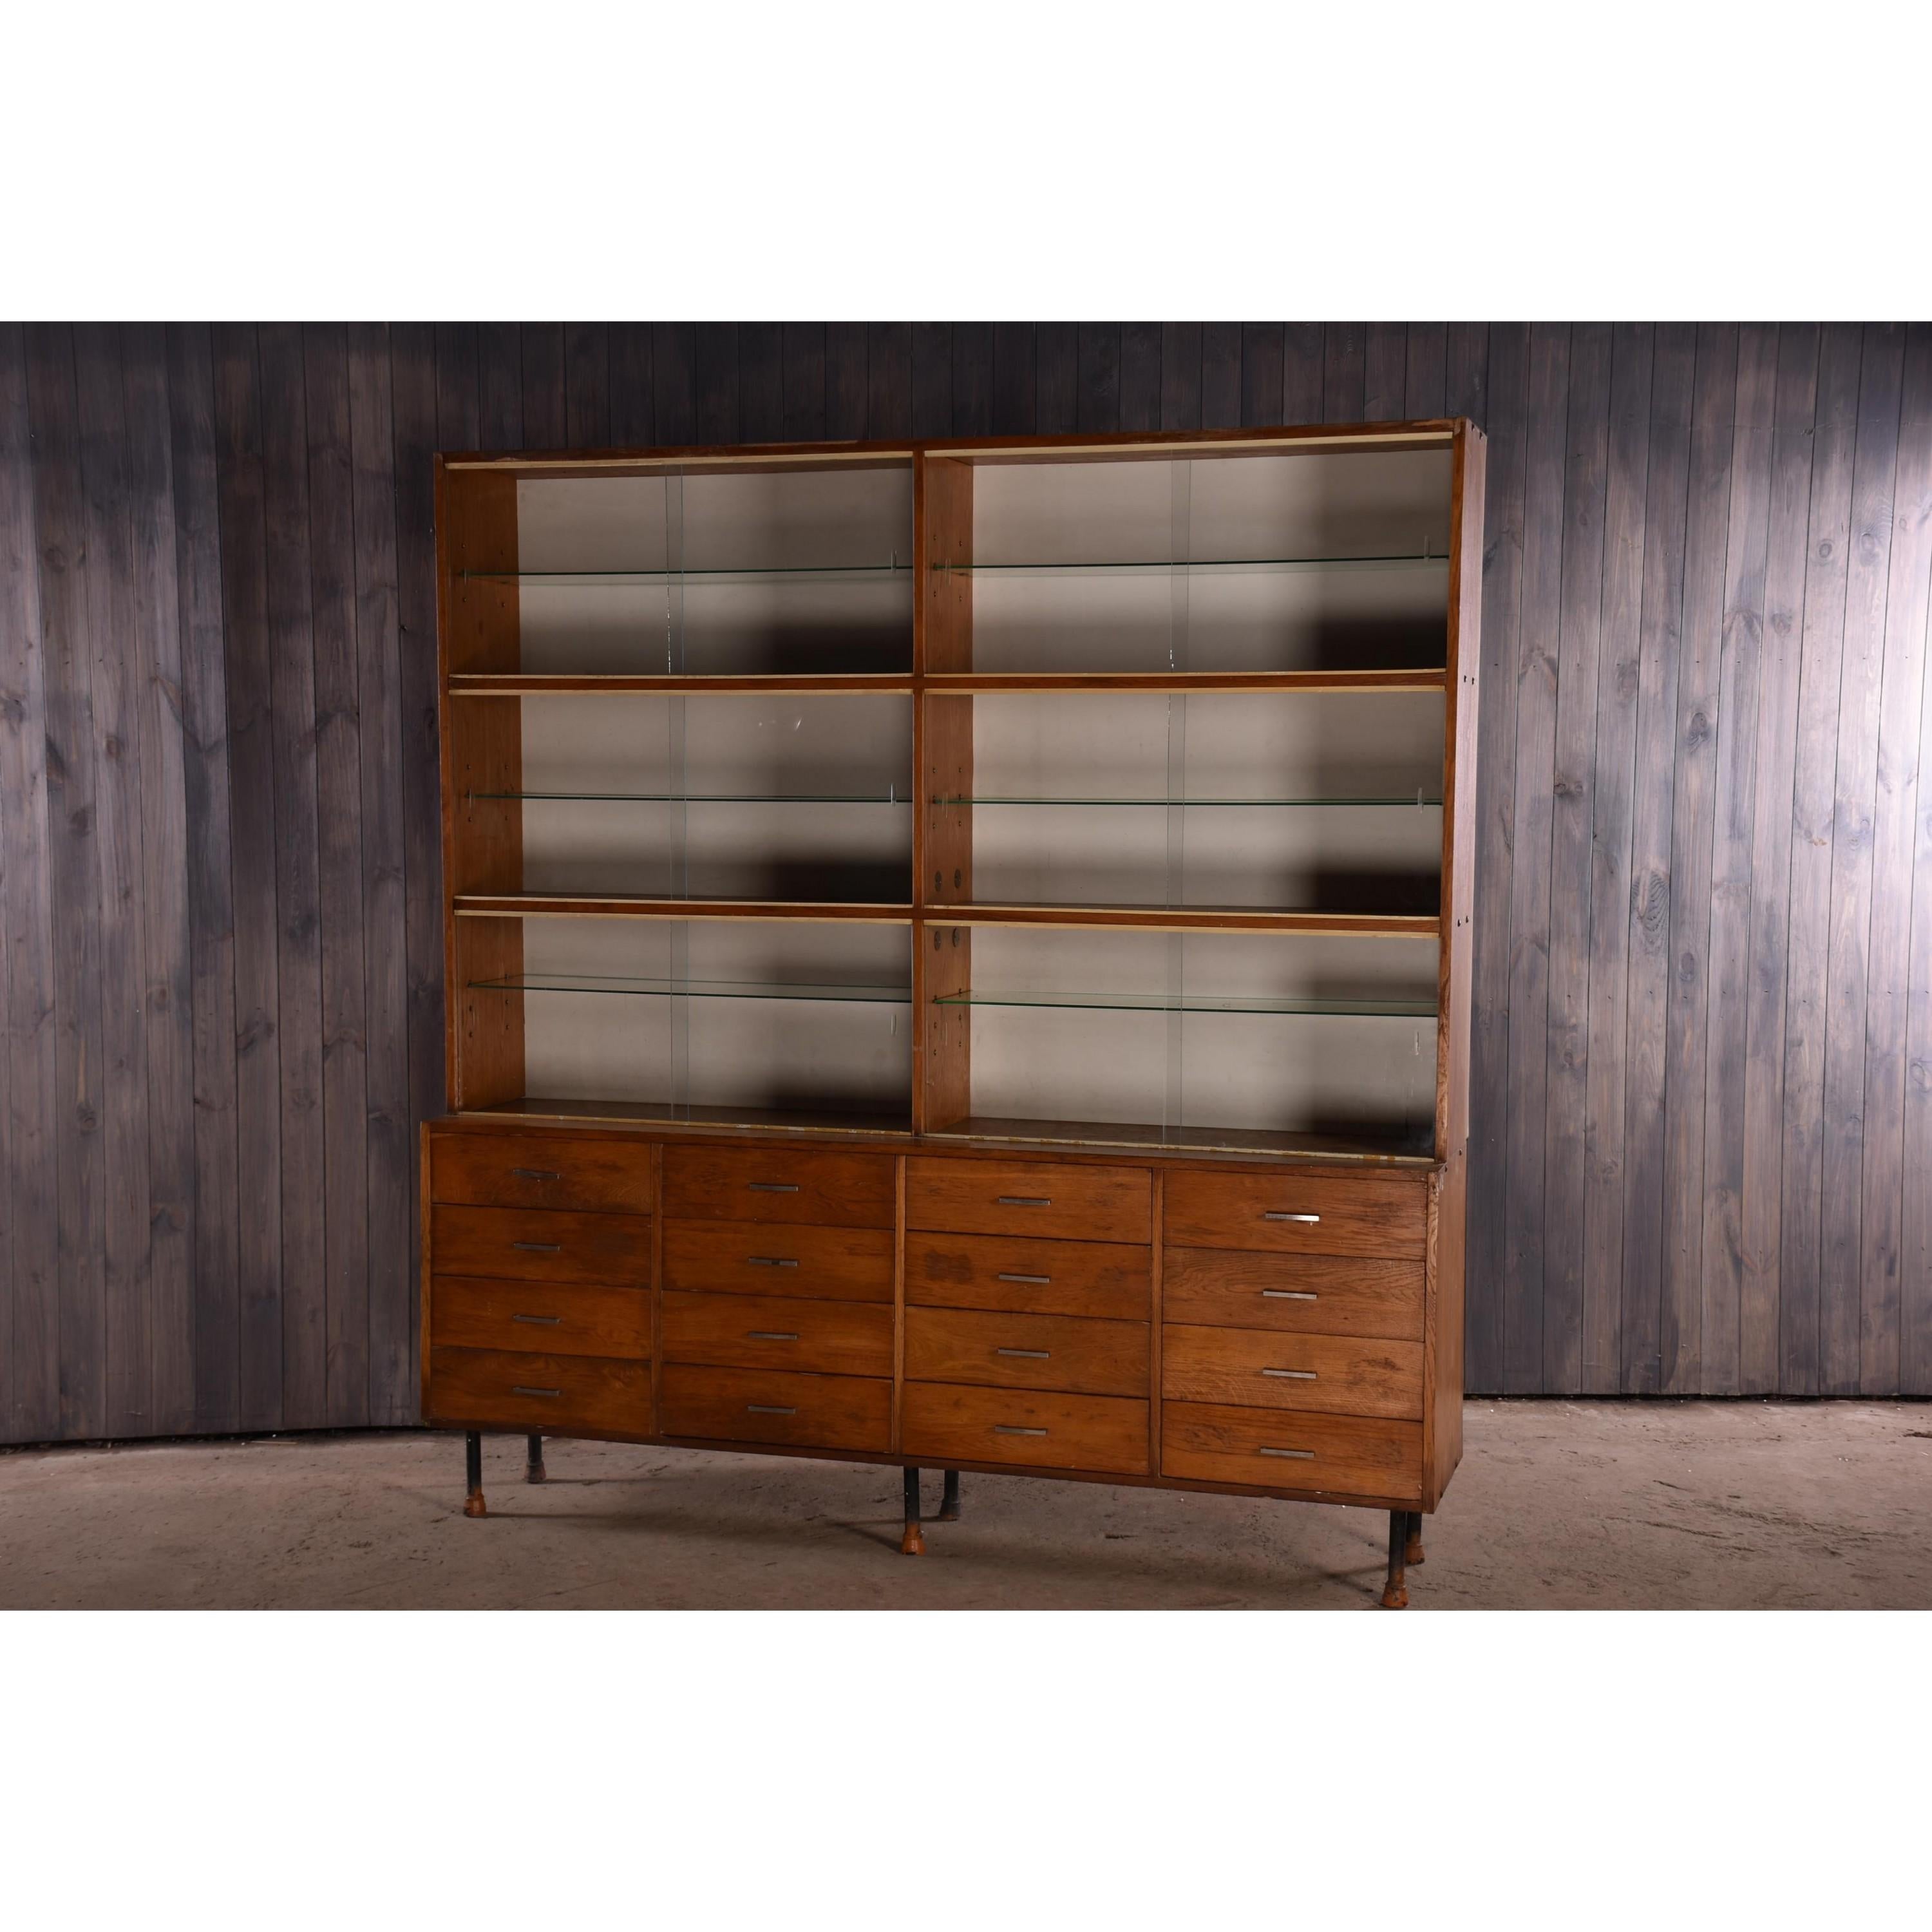 Mid-20th Century Apothecary Haberdashery Display Cabinet circa 1930s Number 12